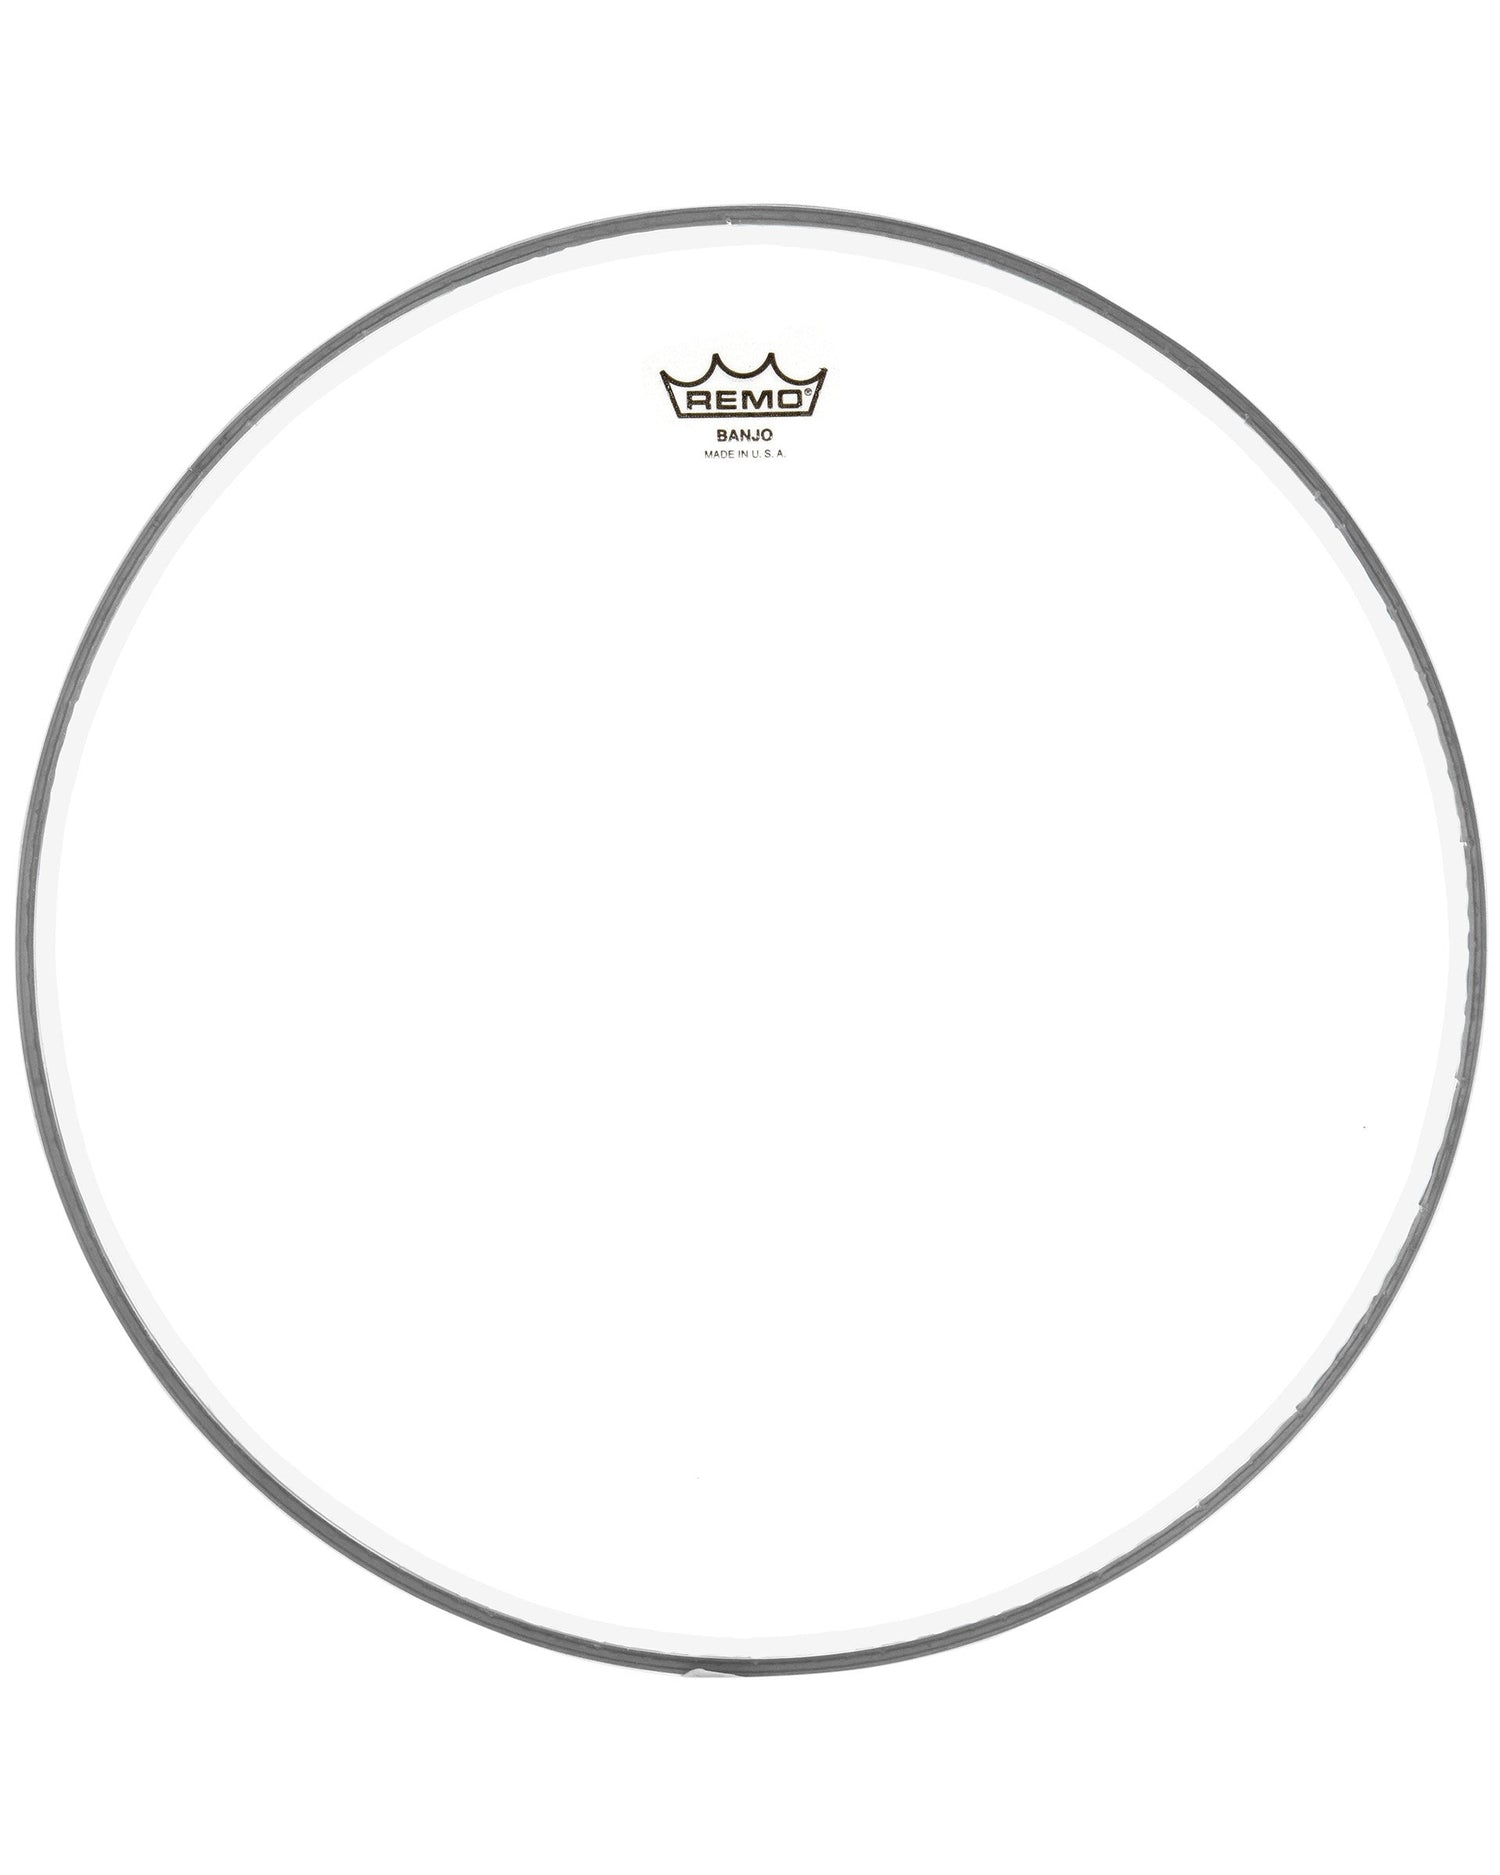 Image 1 of Remo Clear Banjo Head, 10 11/16 Inch Diameter, High Crown (1/2 Inch) - - SKU# B1011-H-CLR : Product Type Accessories & Parts : Elderly Instruments